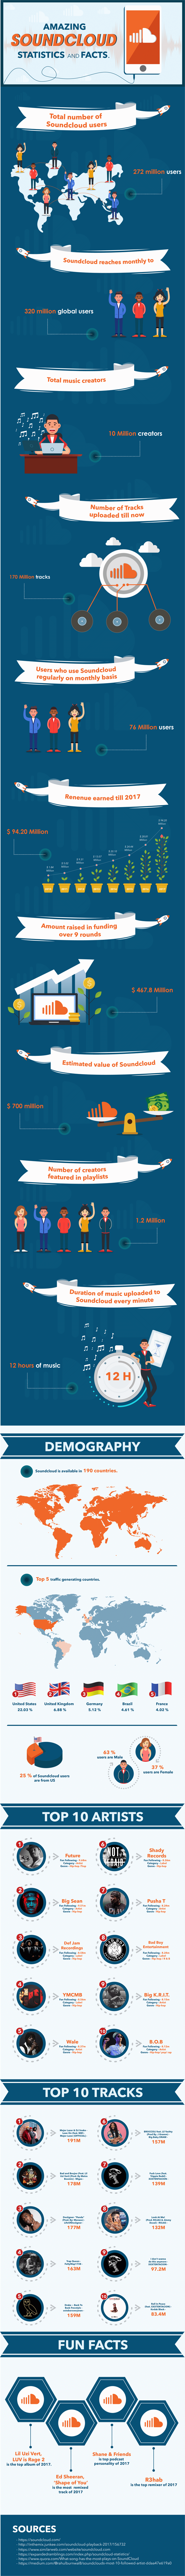 Amazing SoundCloud Facts and Statistics